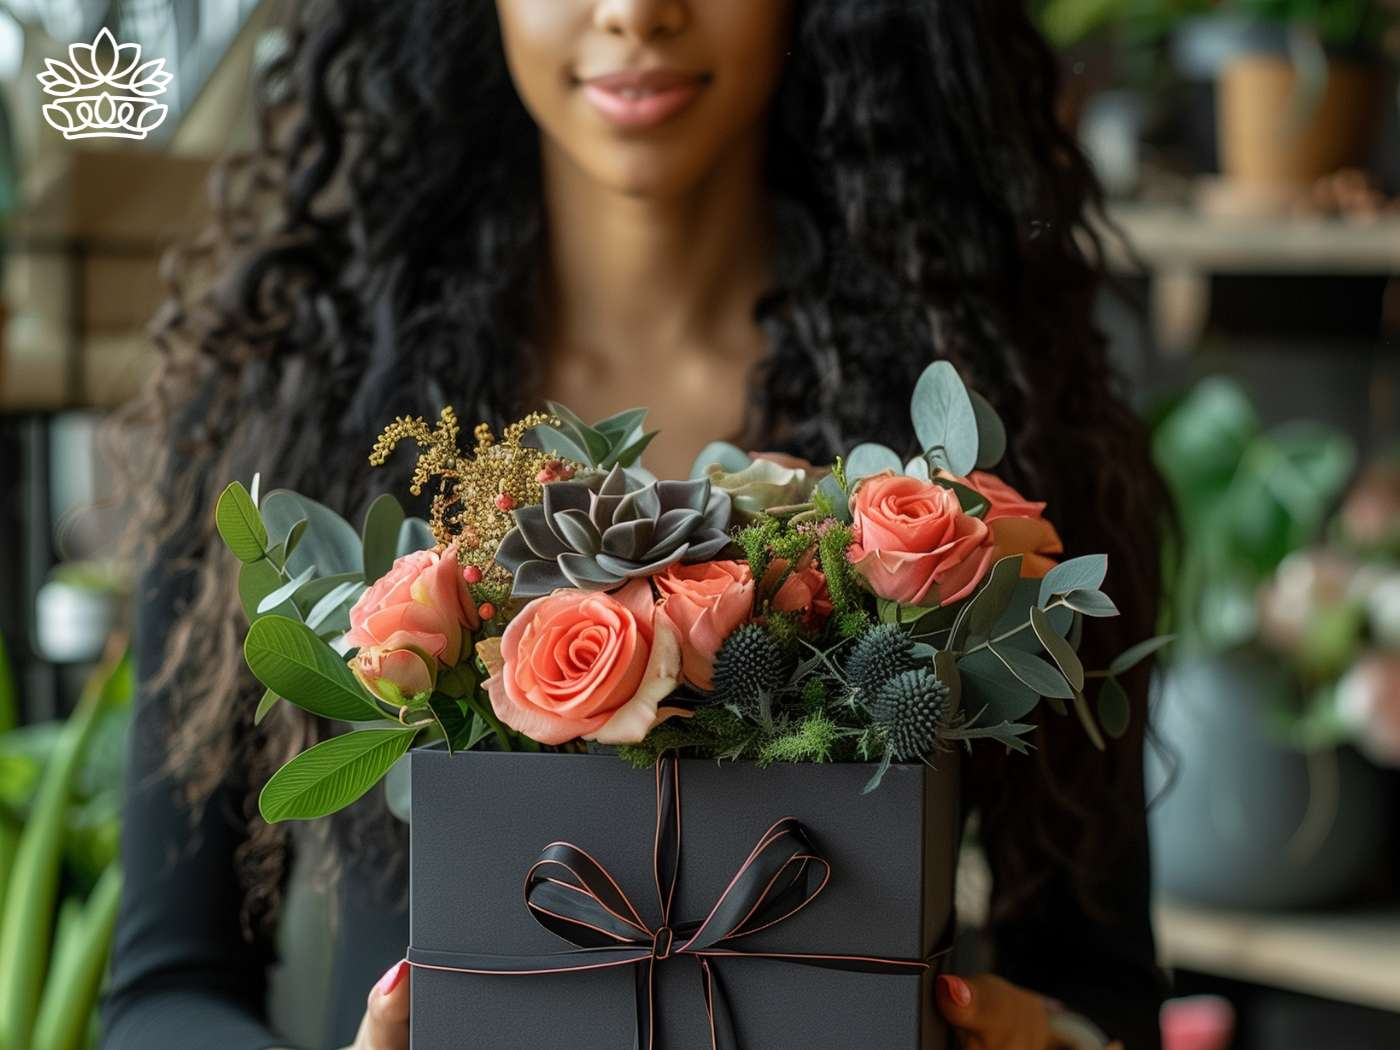 A woman presents a stunning arrangement of flowers in a chic black gift box tied with a delicate ribbon, exemplifying the high-quality, handcrafted floral designs offered by Fabulous Flowers and Gifts.